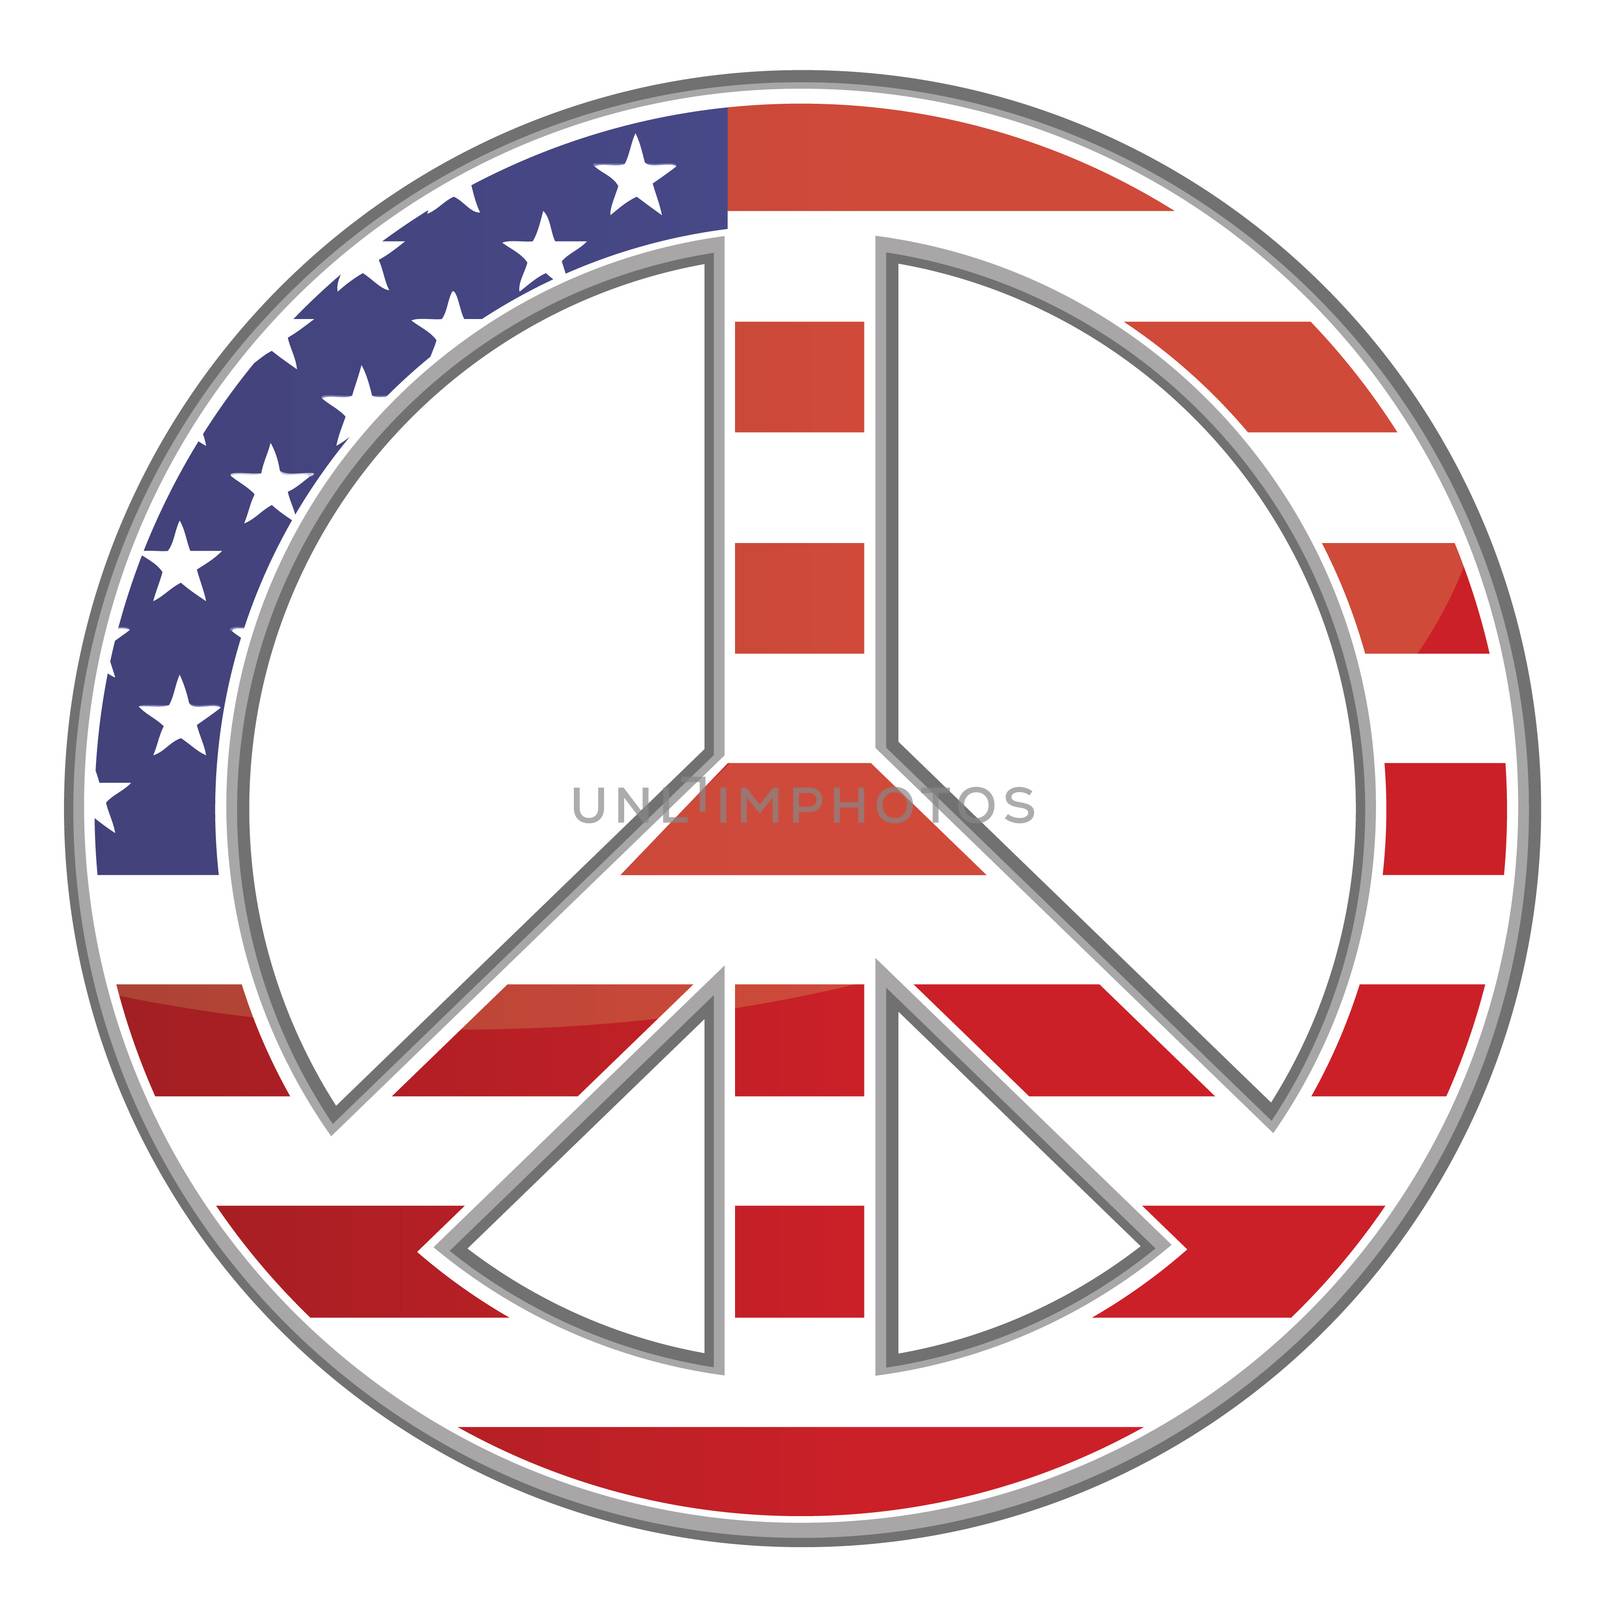 United states peace sign on white background. Vector file available